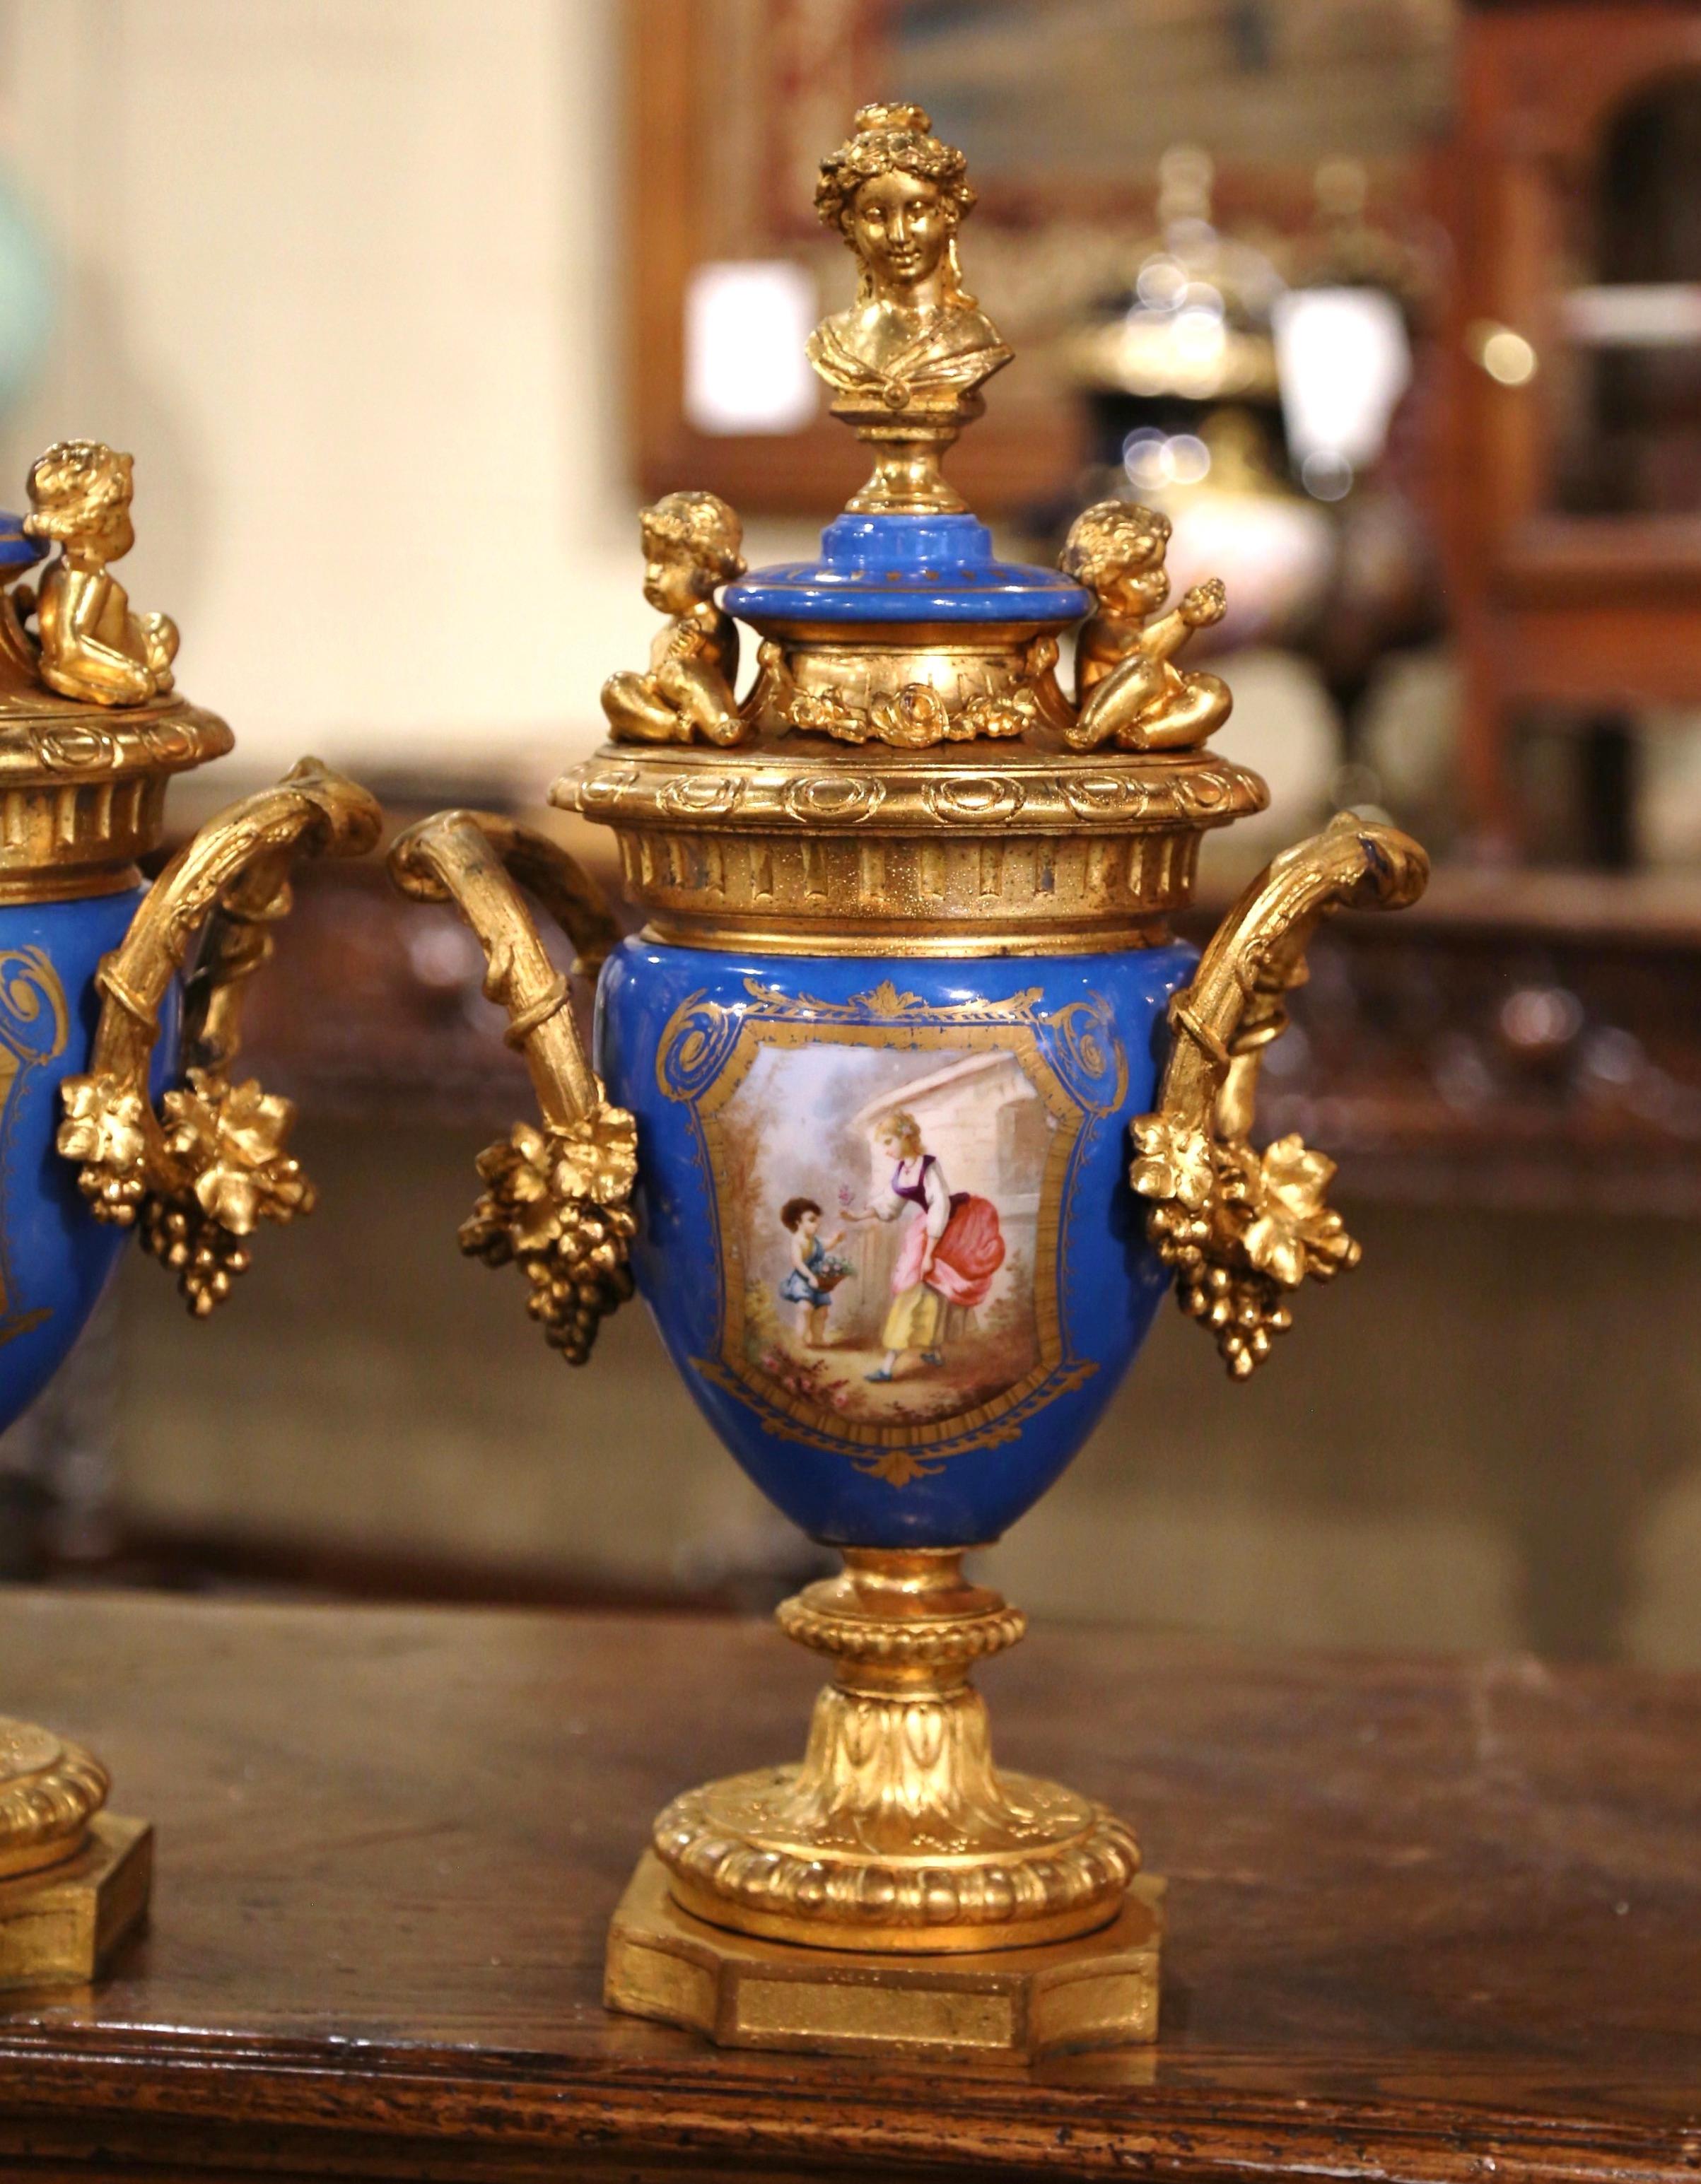 Pair of 19th Century French Blue Porcelain and Gilt Bronze Sèvres Urns Vases For Sale 1